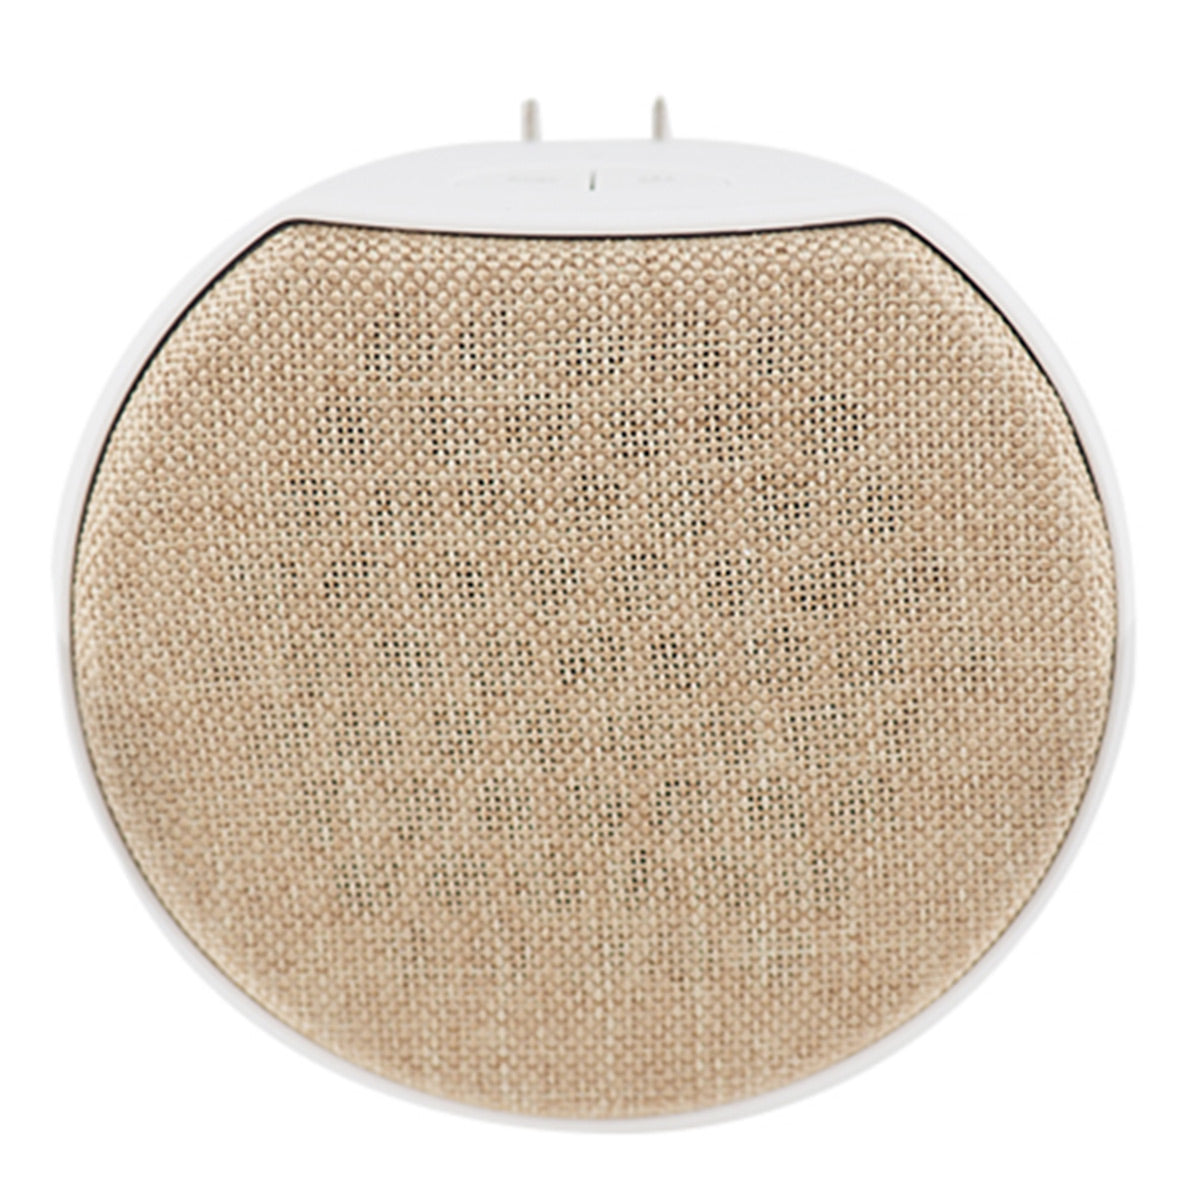 OC Acoustic Newport Plug-in Outlet Speaker with Bluetooth 5.1 and Built-in USB Type-A Charging Port - Set of 4 (Champagne/White)